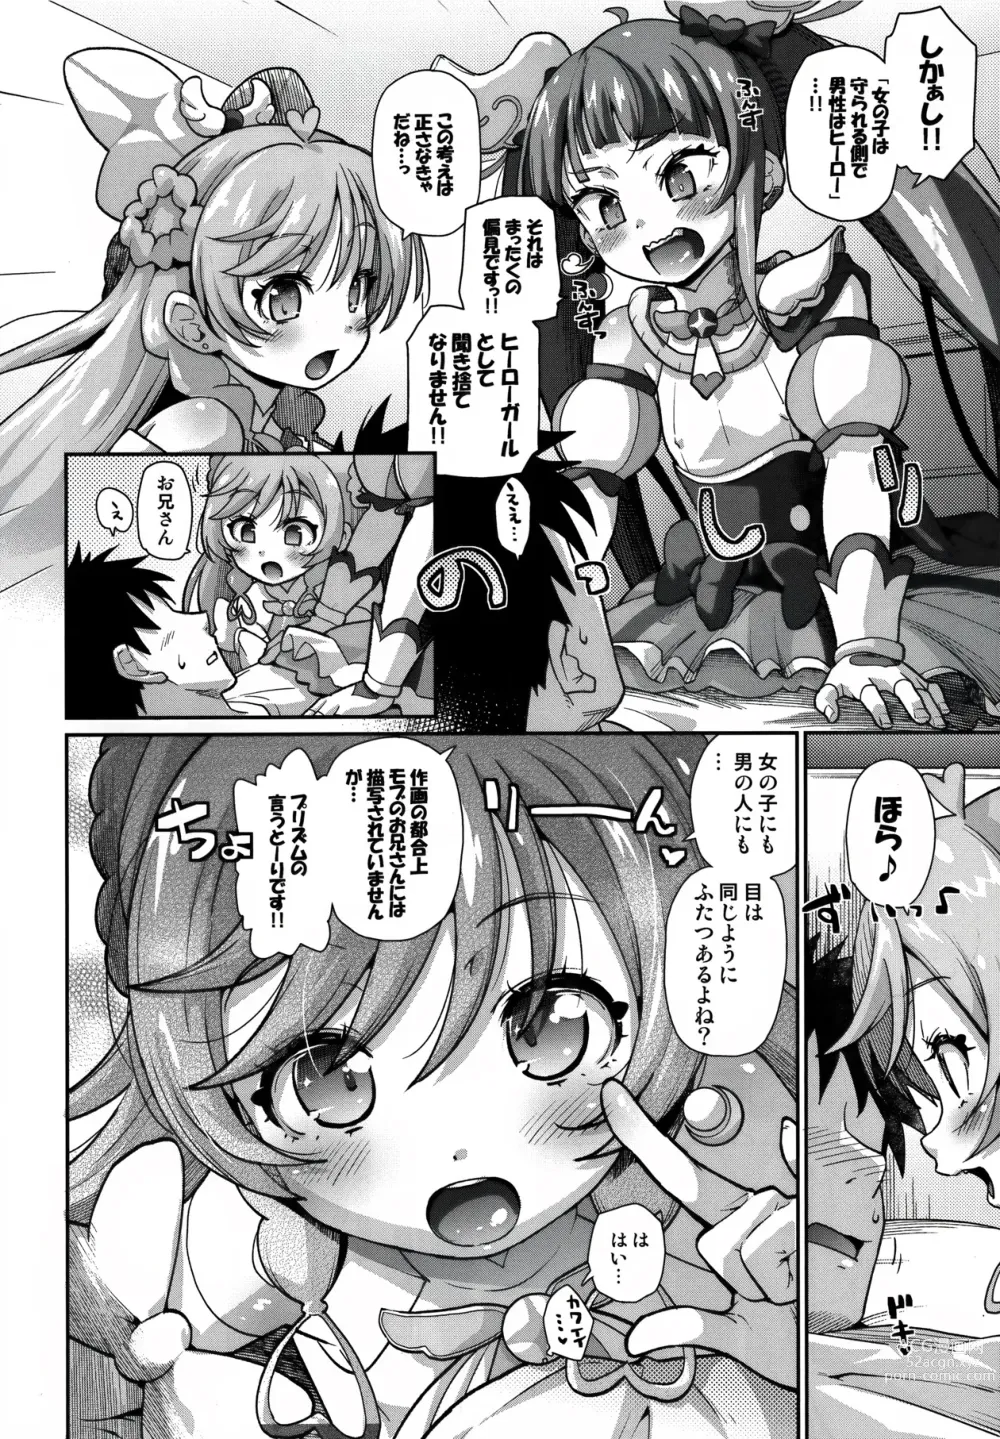 Page 6 of doujinshi Sora-chan IS THE LIMIT